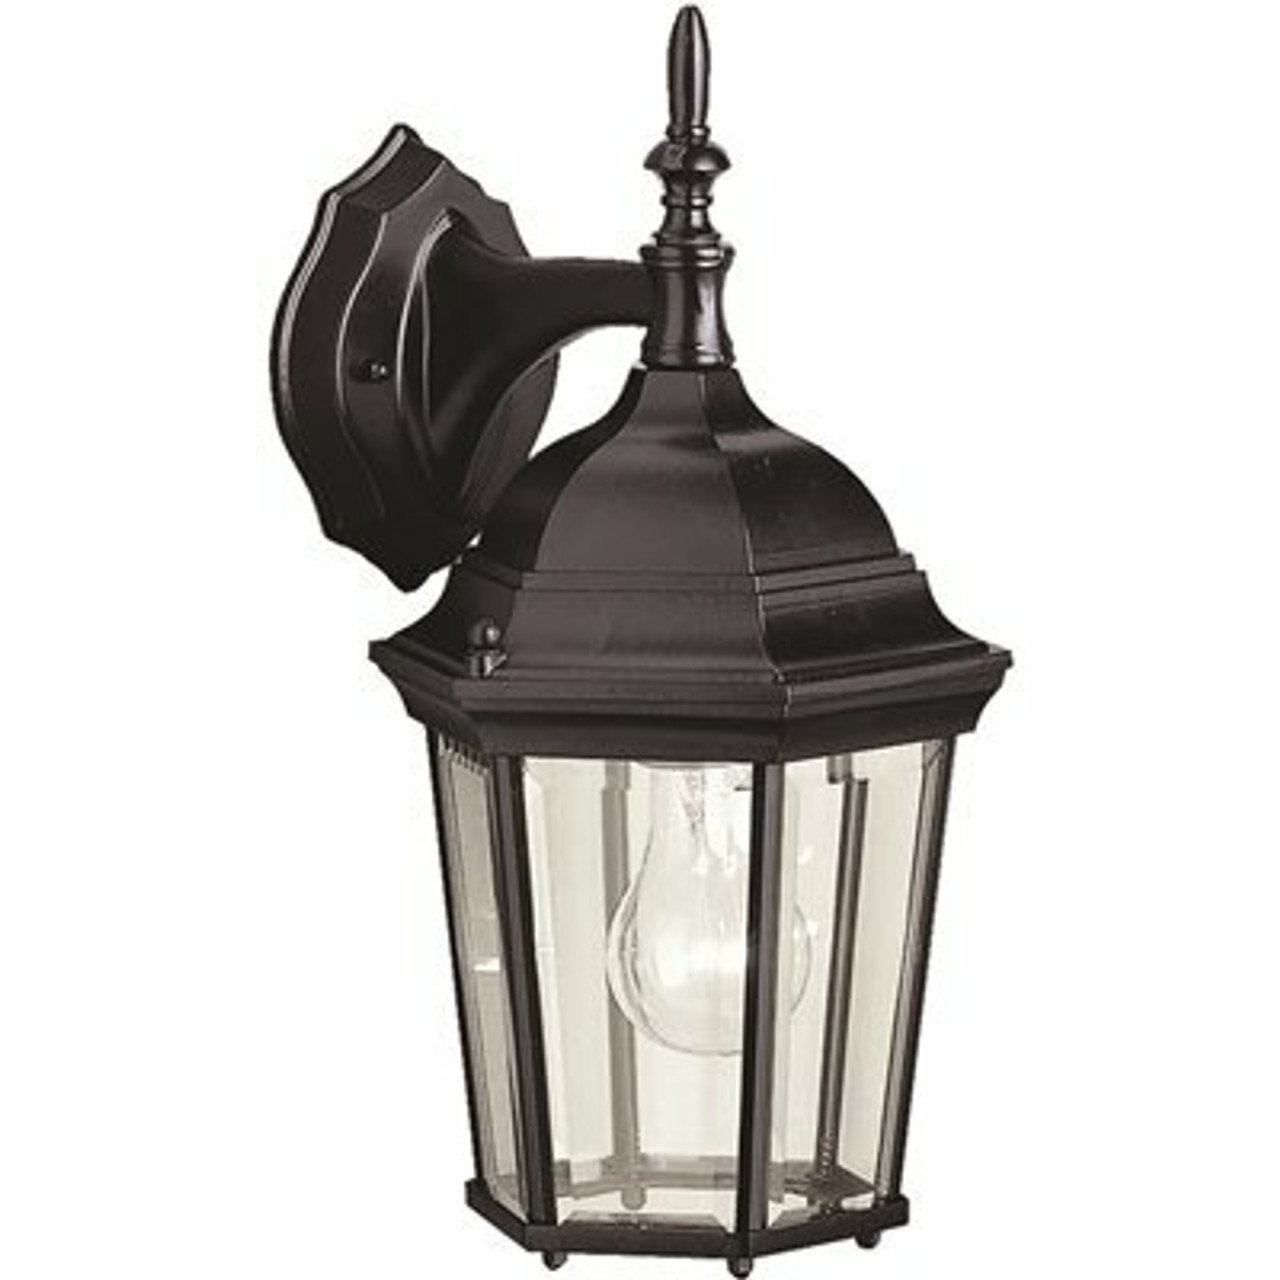 1-Light Small Outdoor Textured Black Wall Lantern Sconce